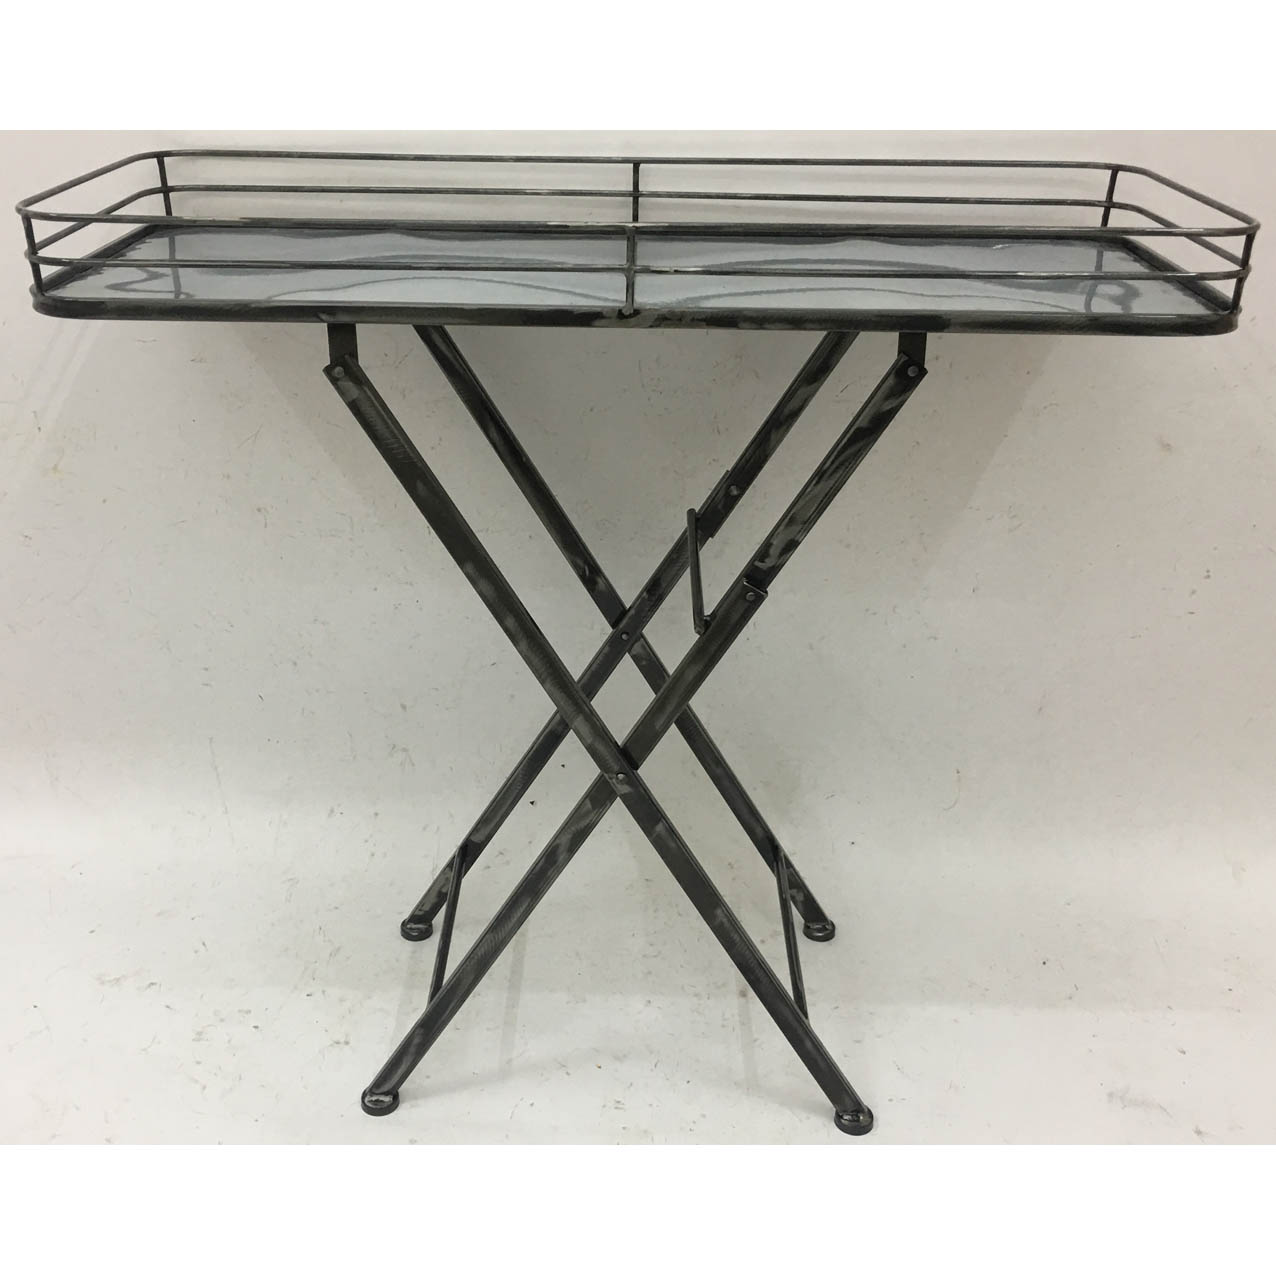 Rectangular tray with folding metal stand